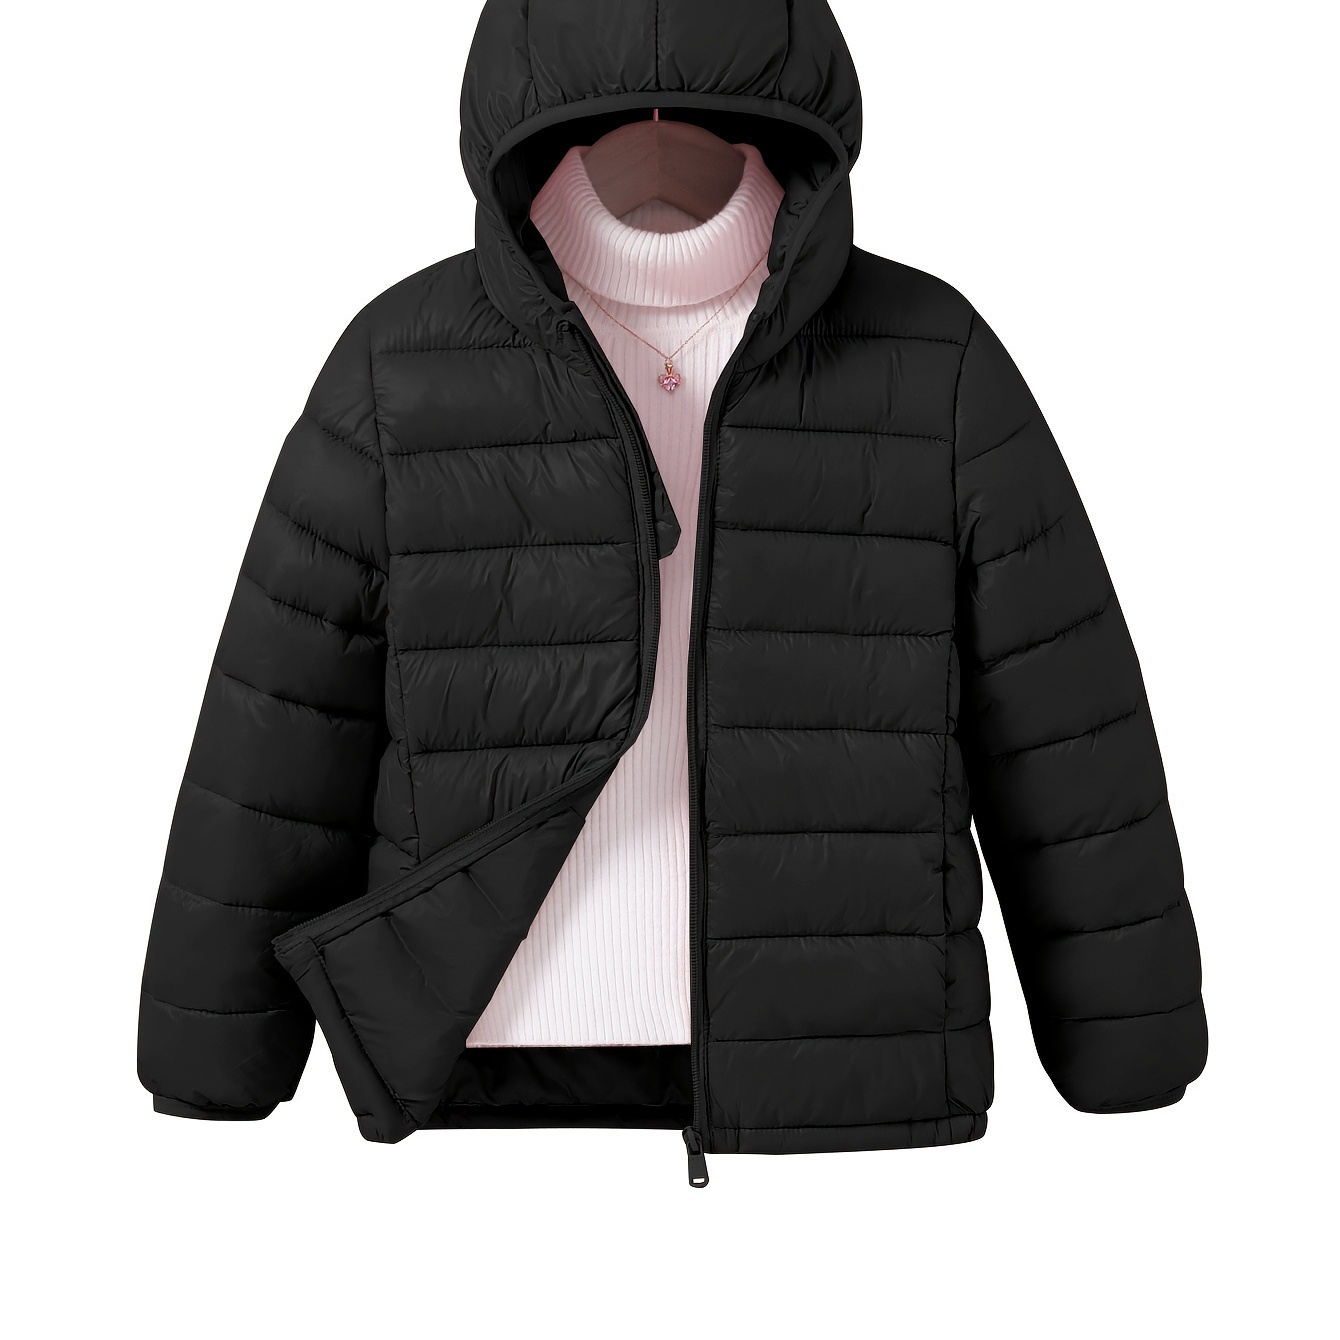 

Boy/ Girl Zipper Hood Solid Warm Lightweight Alternative Down Coat For Winter Outerwear (recommended 1 Size Up)